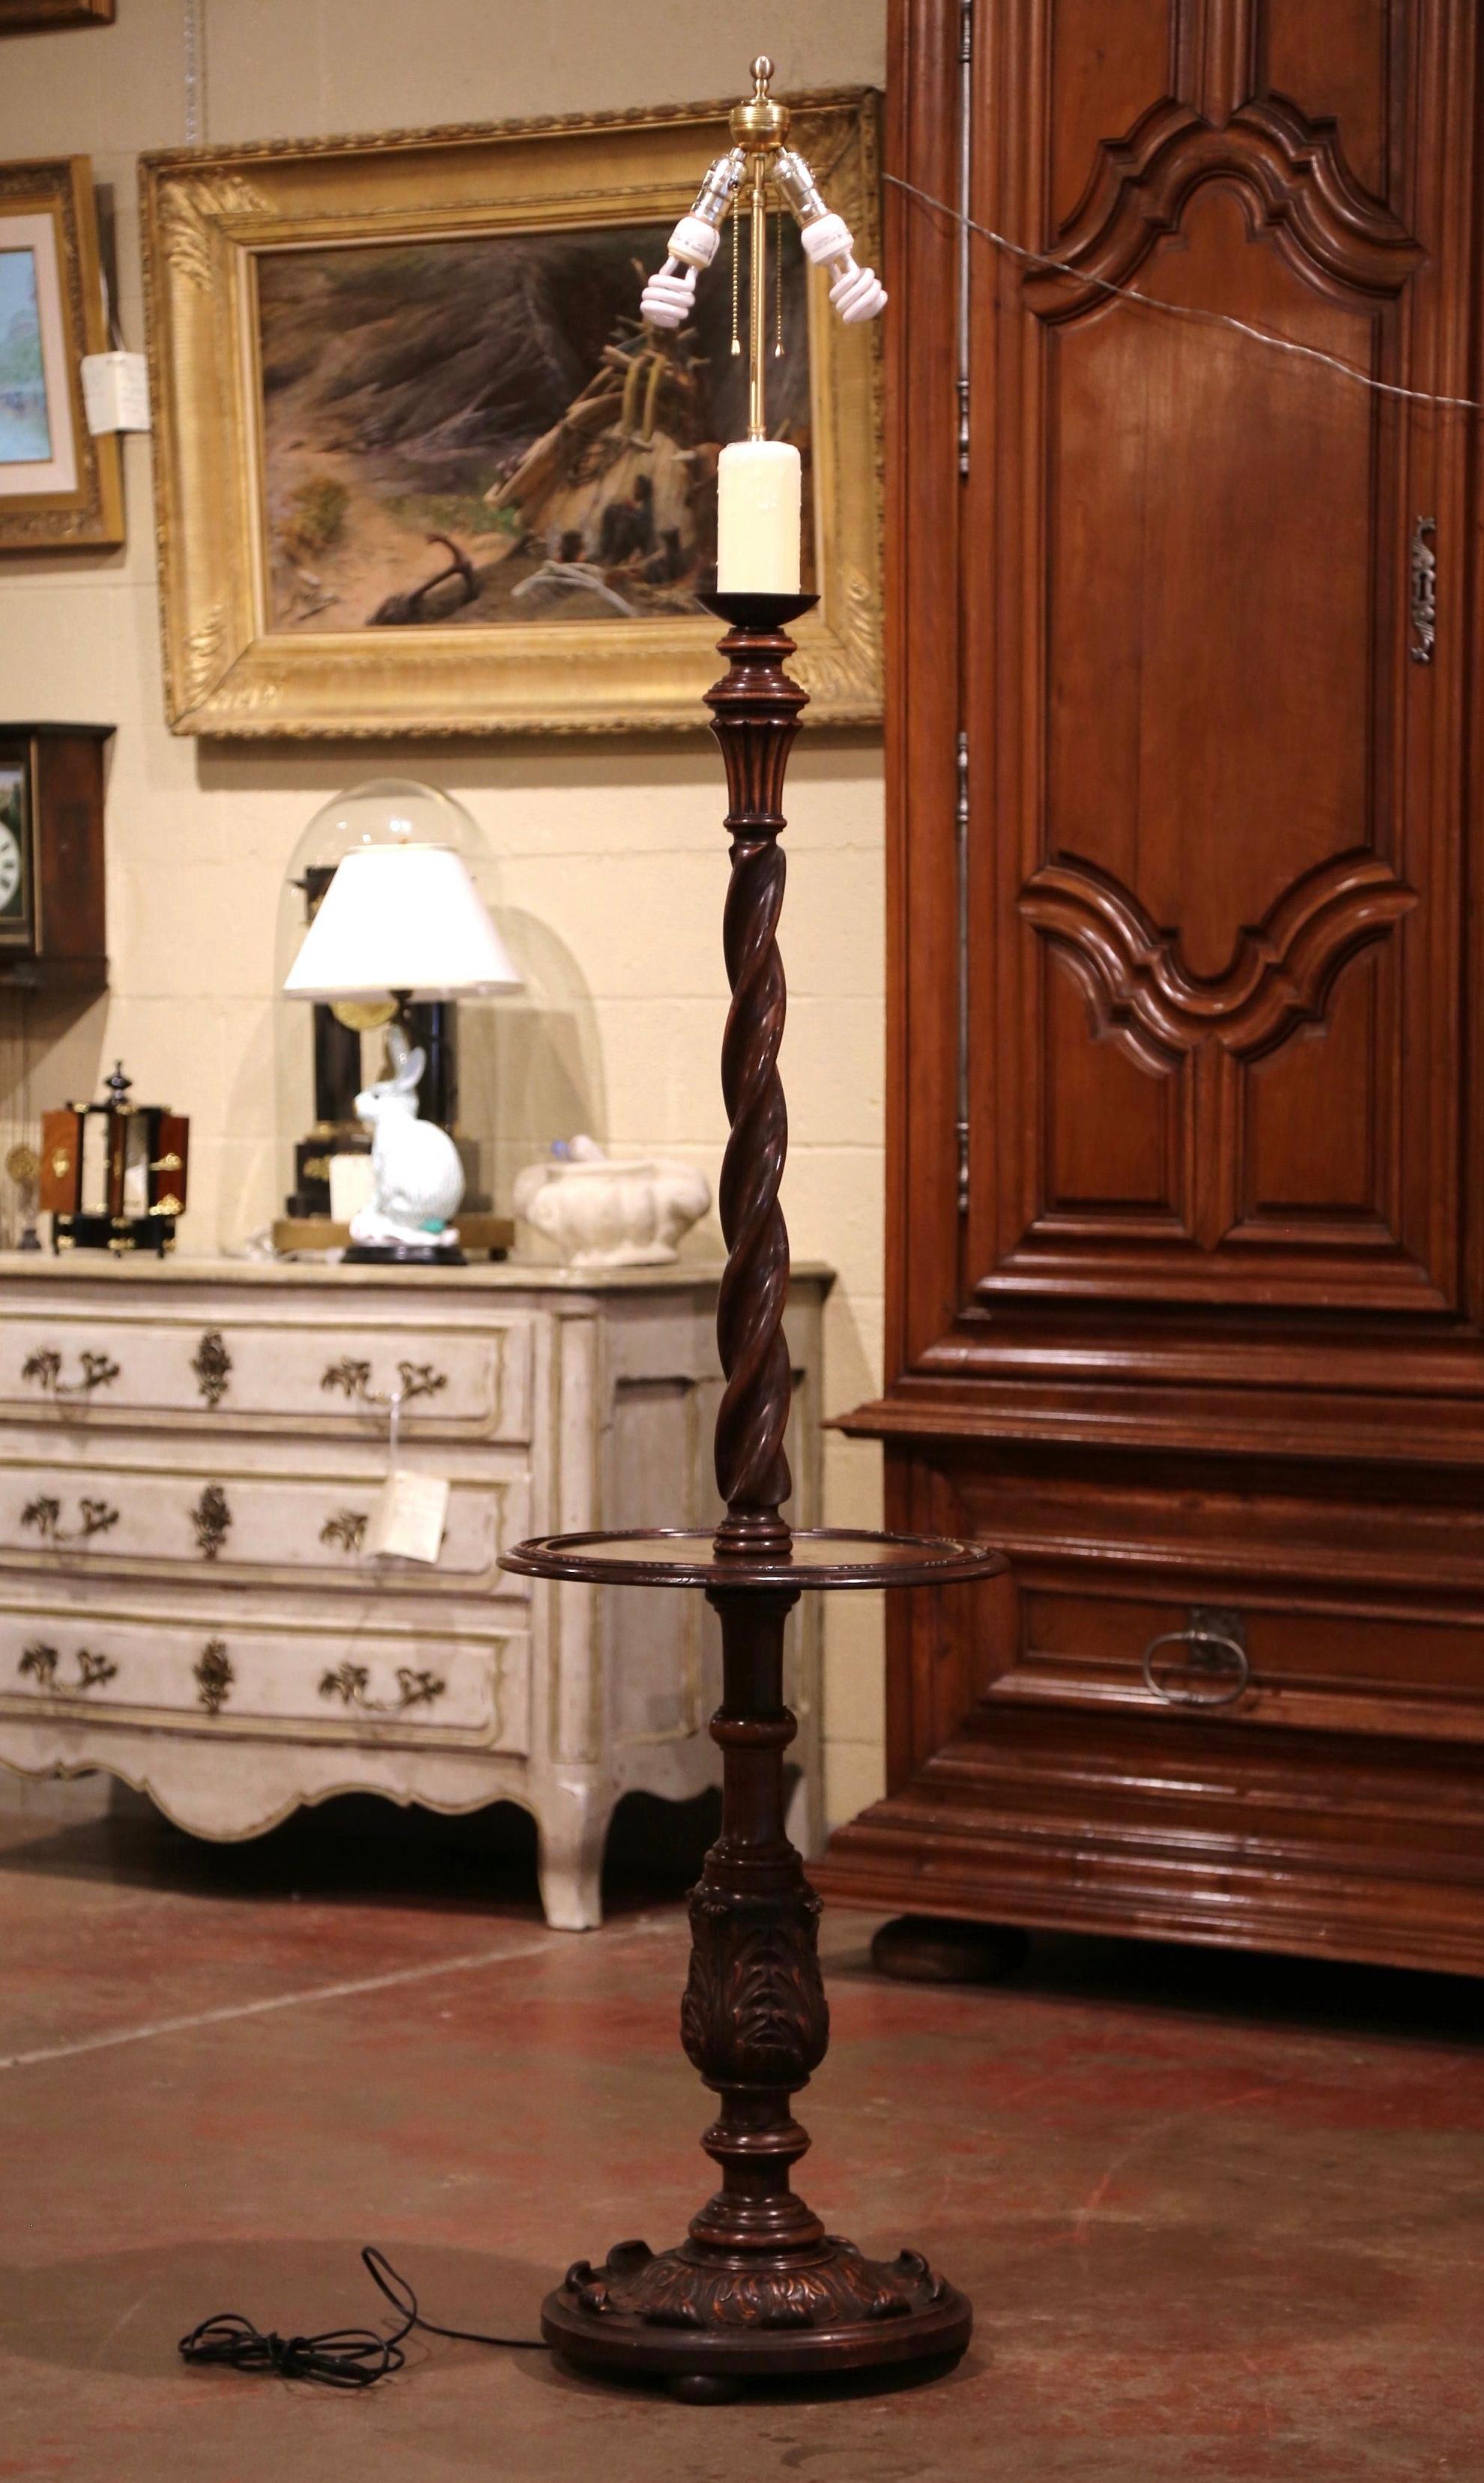 This unique, antique floor lamp was crafted in Northern France, circa 1920. Seated on three small feet over a circular base decorated with hand carved leaf motifs, the lamp features a barley twist stem embellished with acanthus leaf decor over a